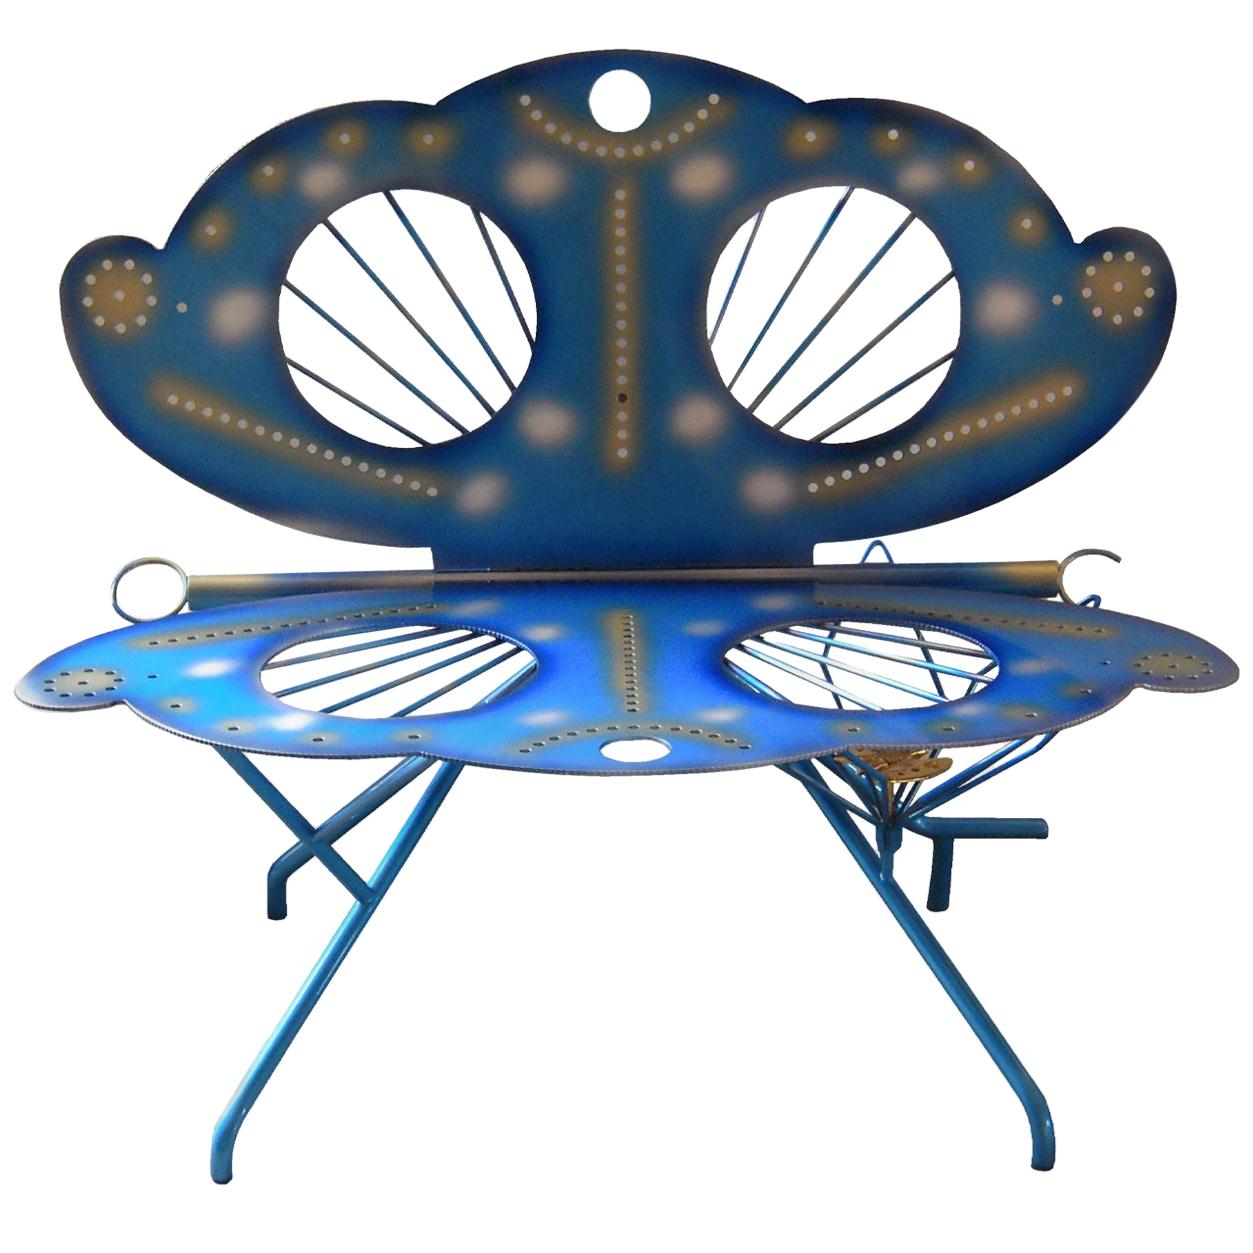 Italian Zanotta R. Dalisi Blue Painted Steel Bench, Limited Edition For Sale